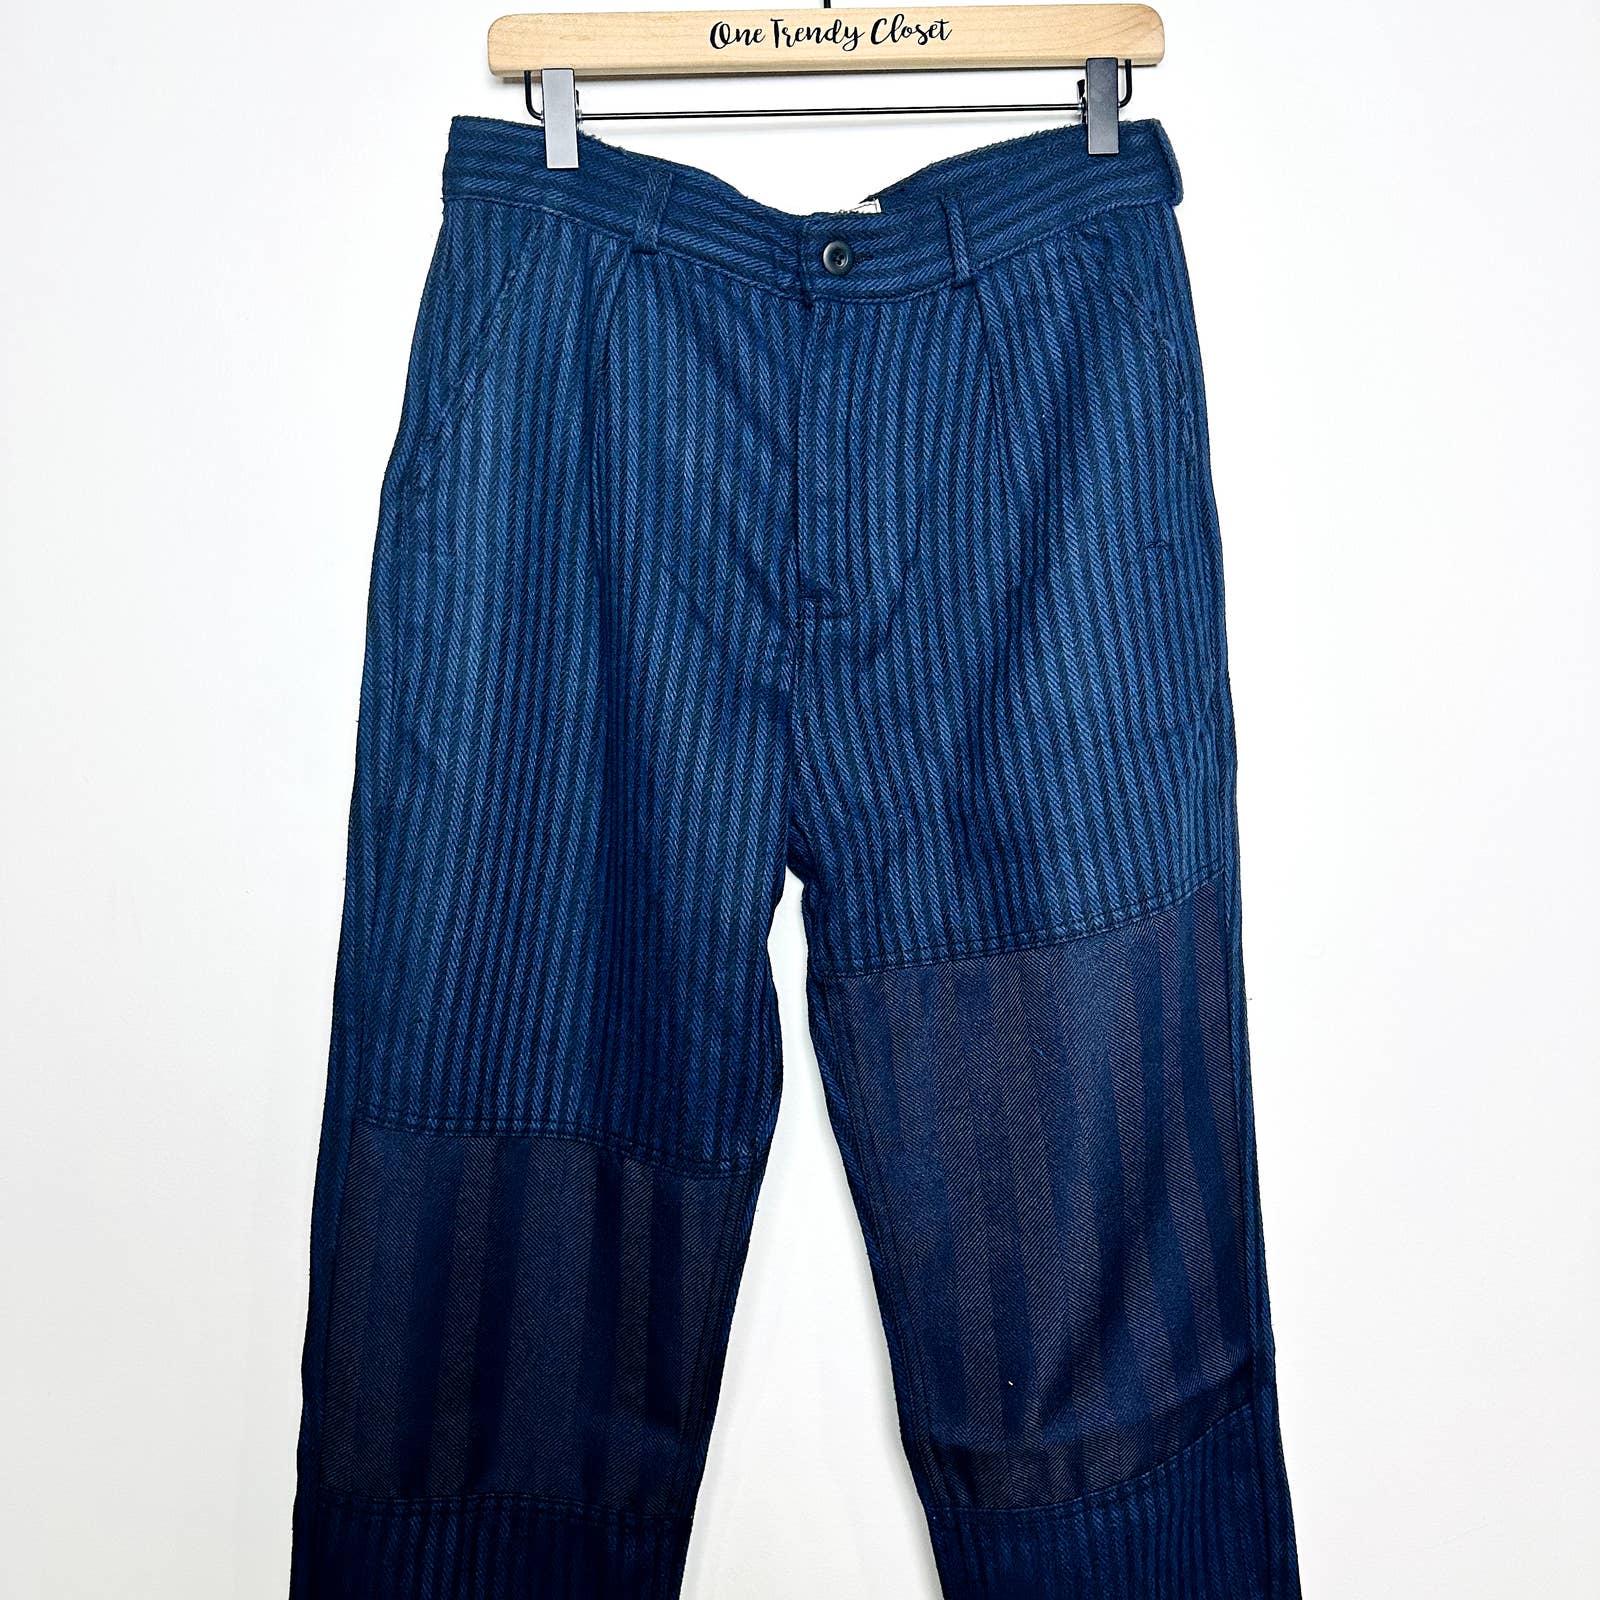 Free People X Sandrine Rose NWT Paper with Patch Pinstripes Pants Berlin